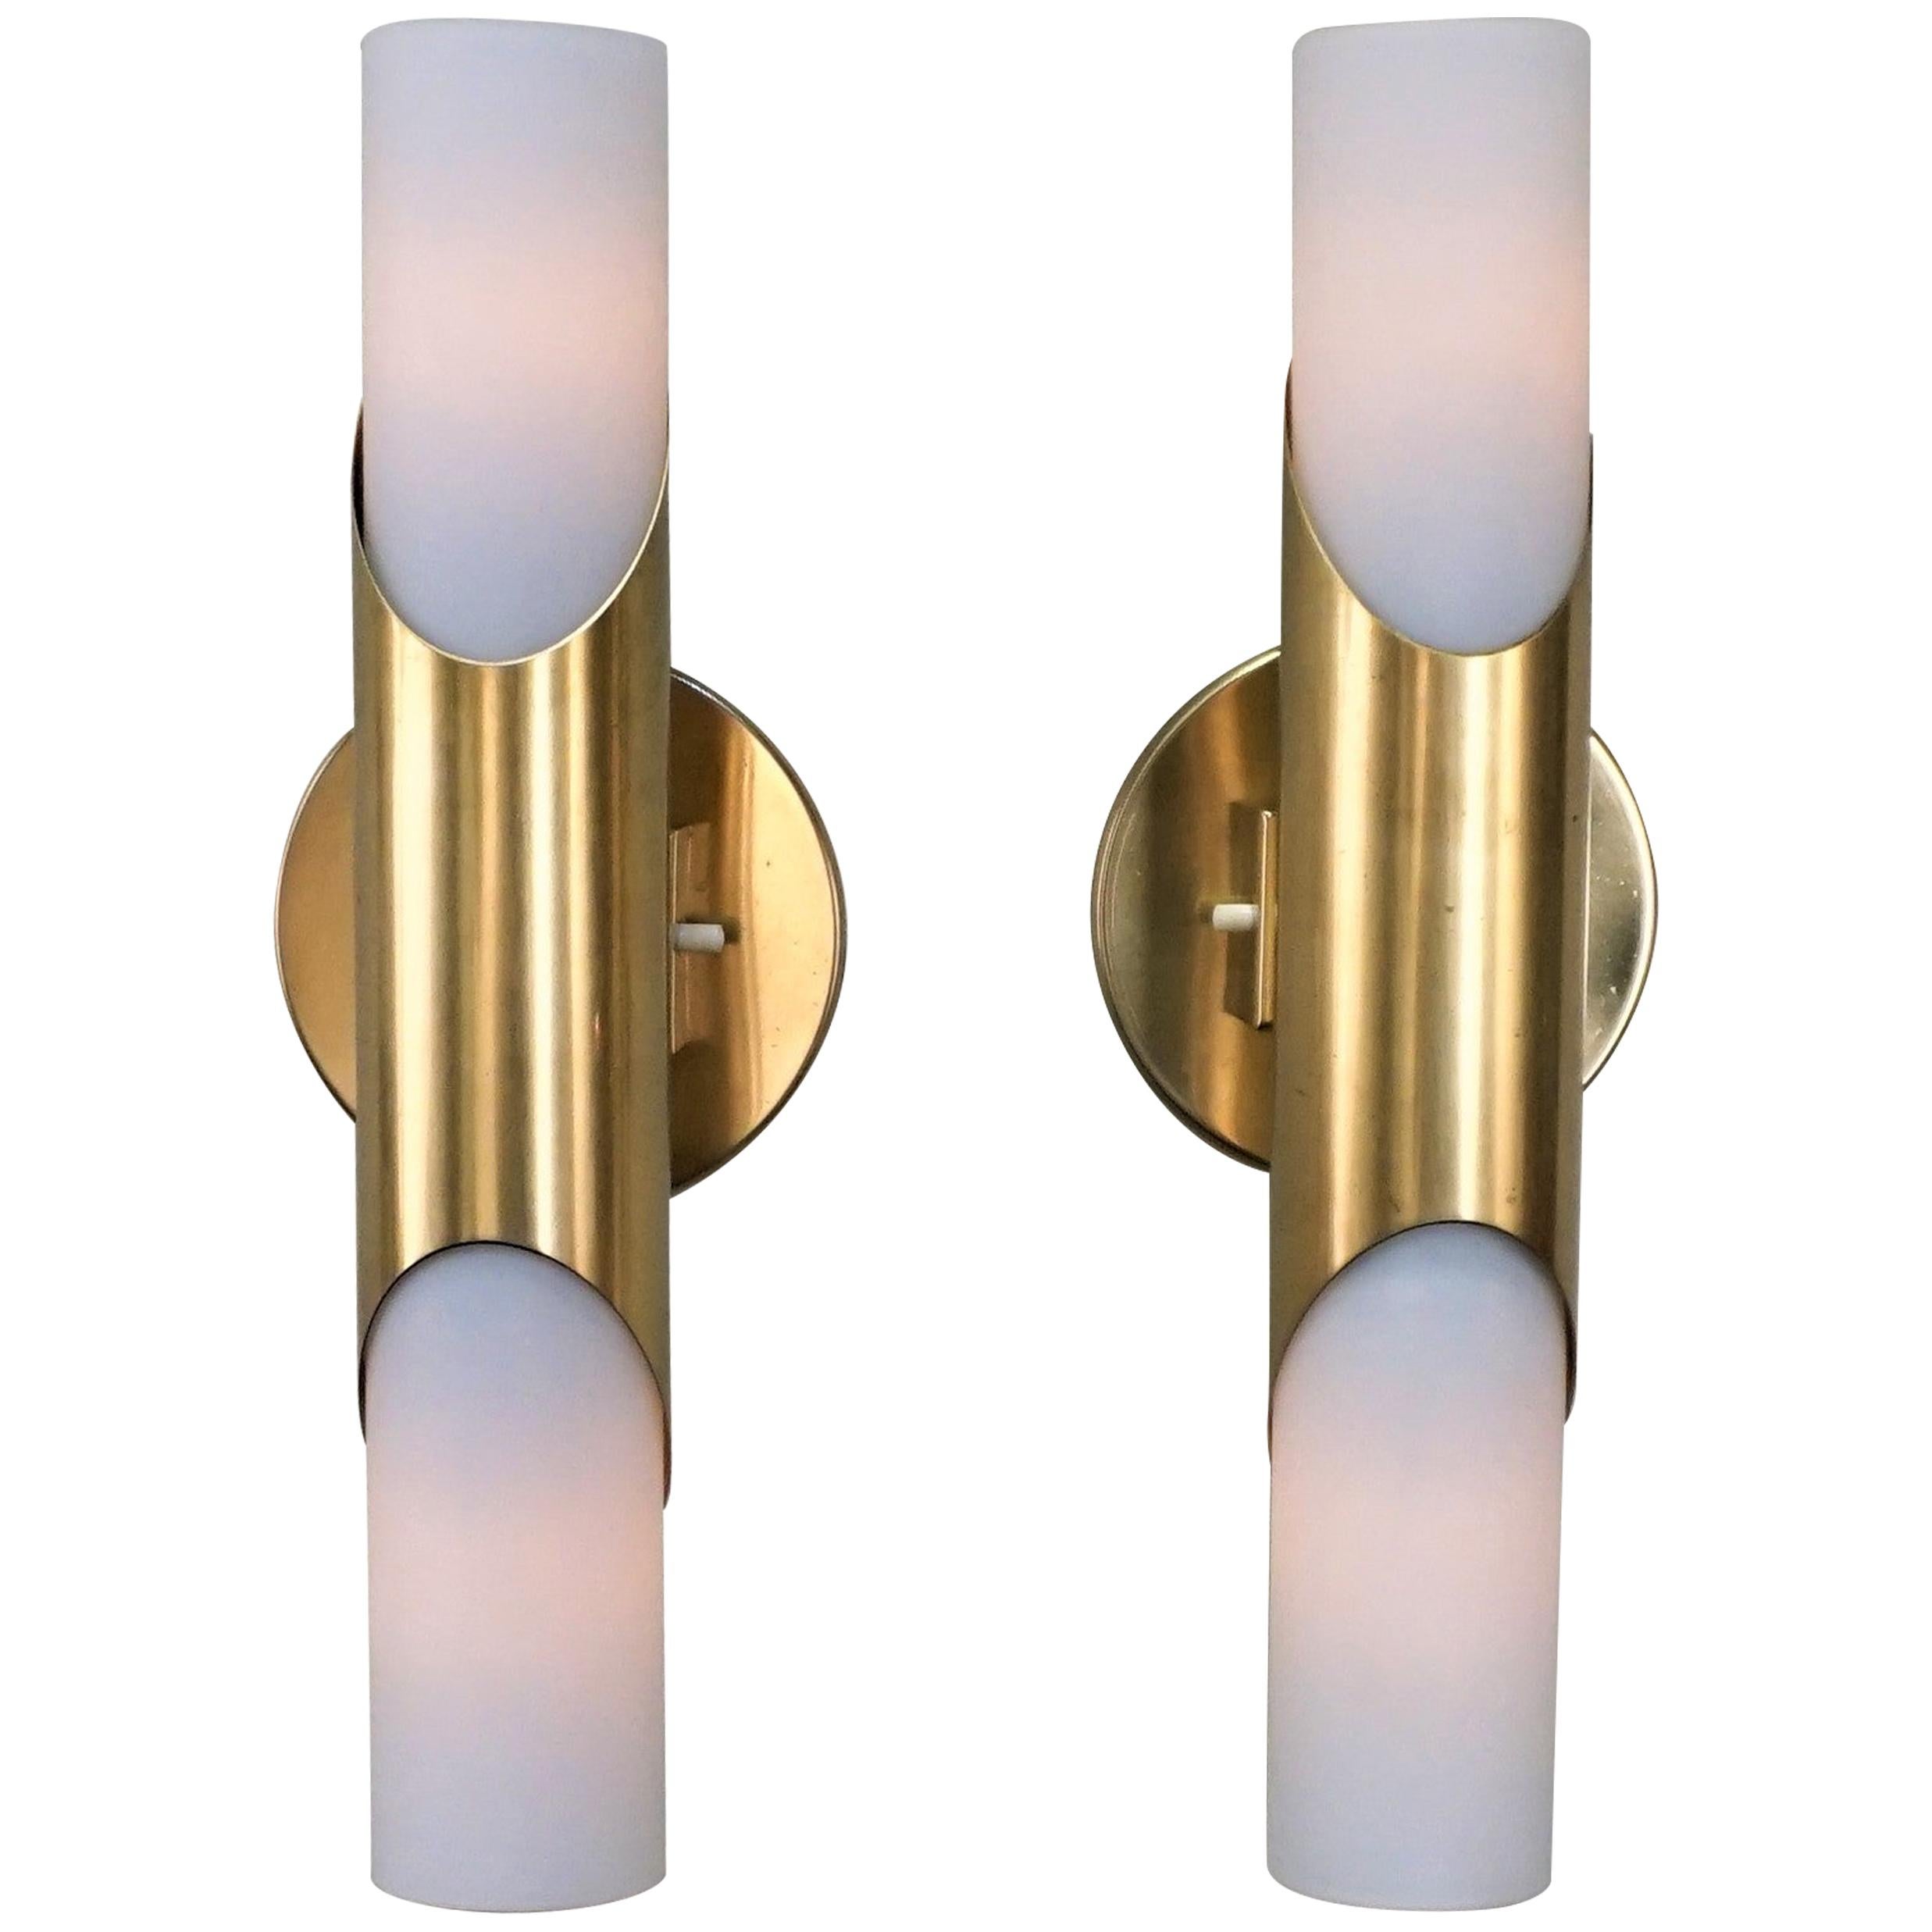 Pair of Wall Sconces or Wall Lights in the Style of RAAK, Amsterdam, 1970